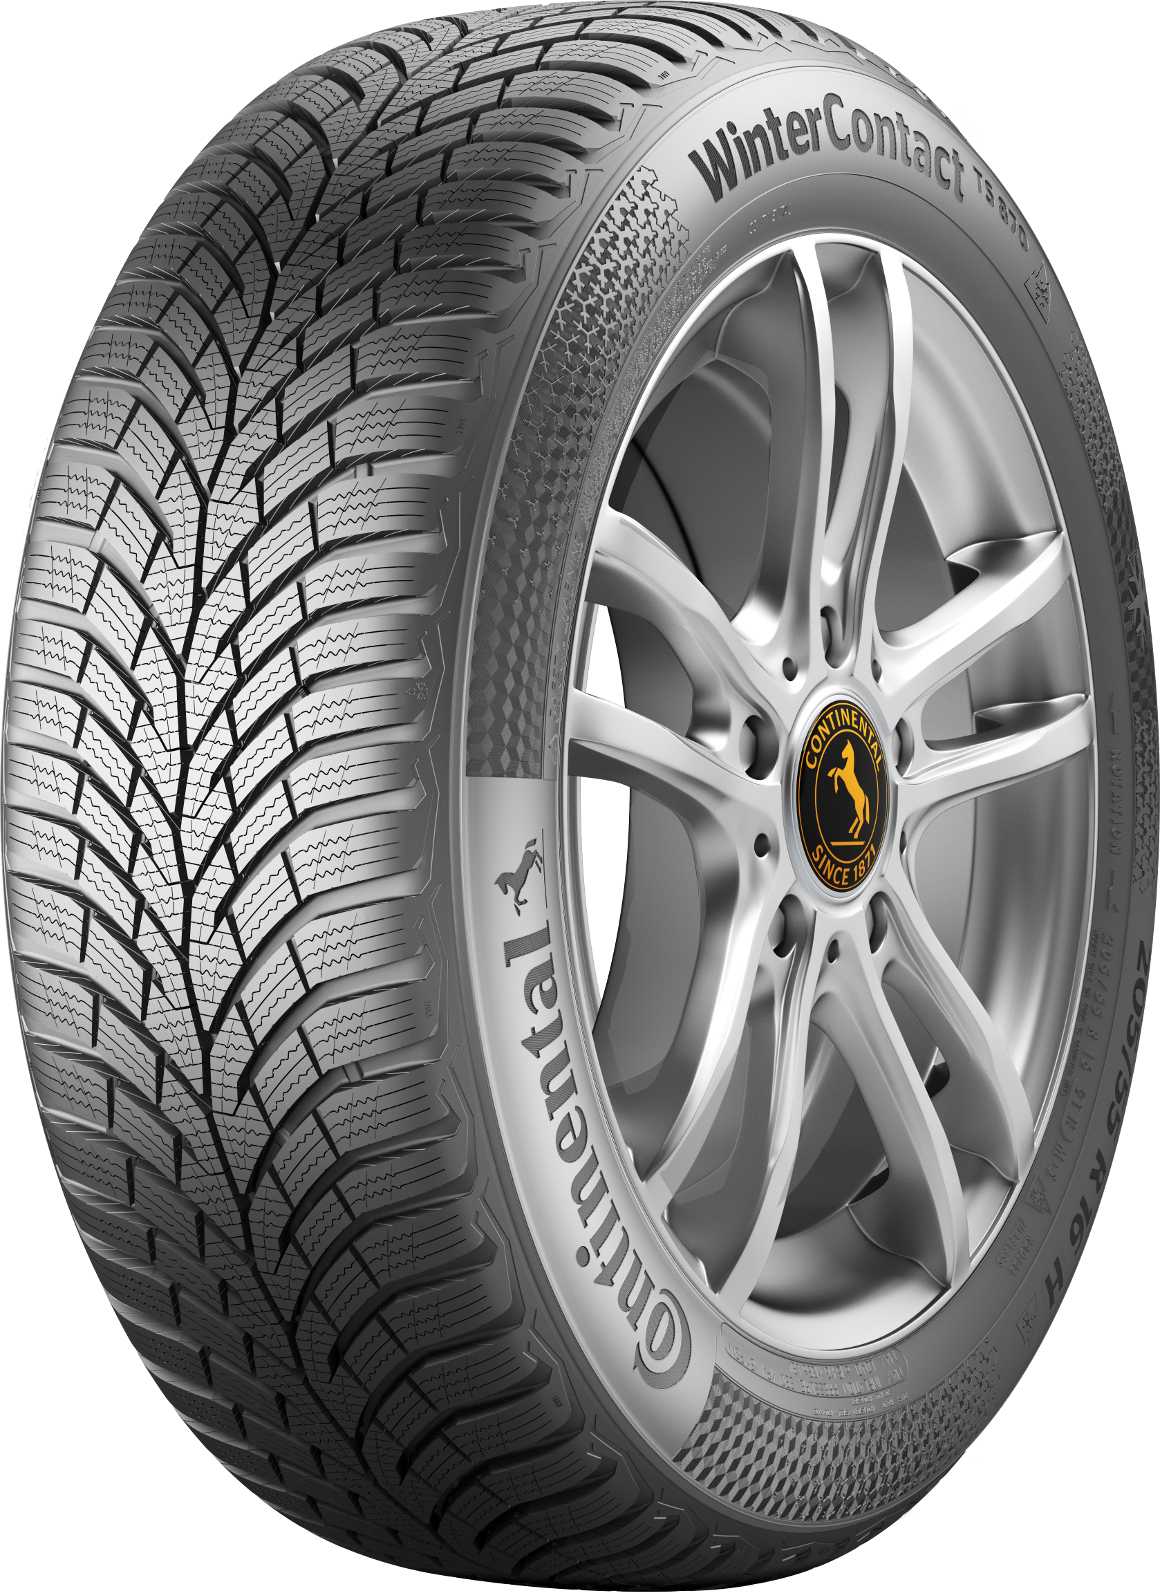    Continental Winter Contact TS870 185/65 R15 